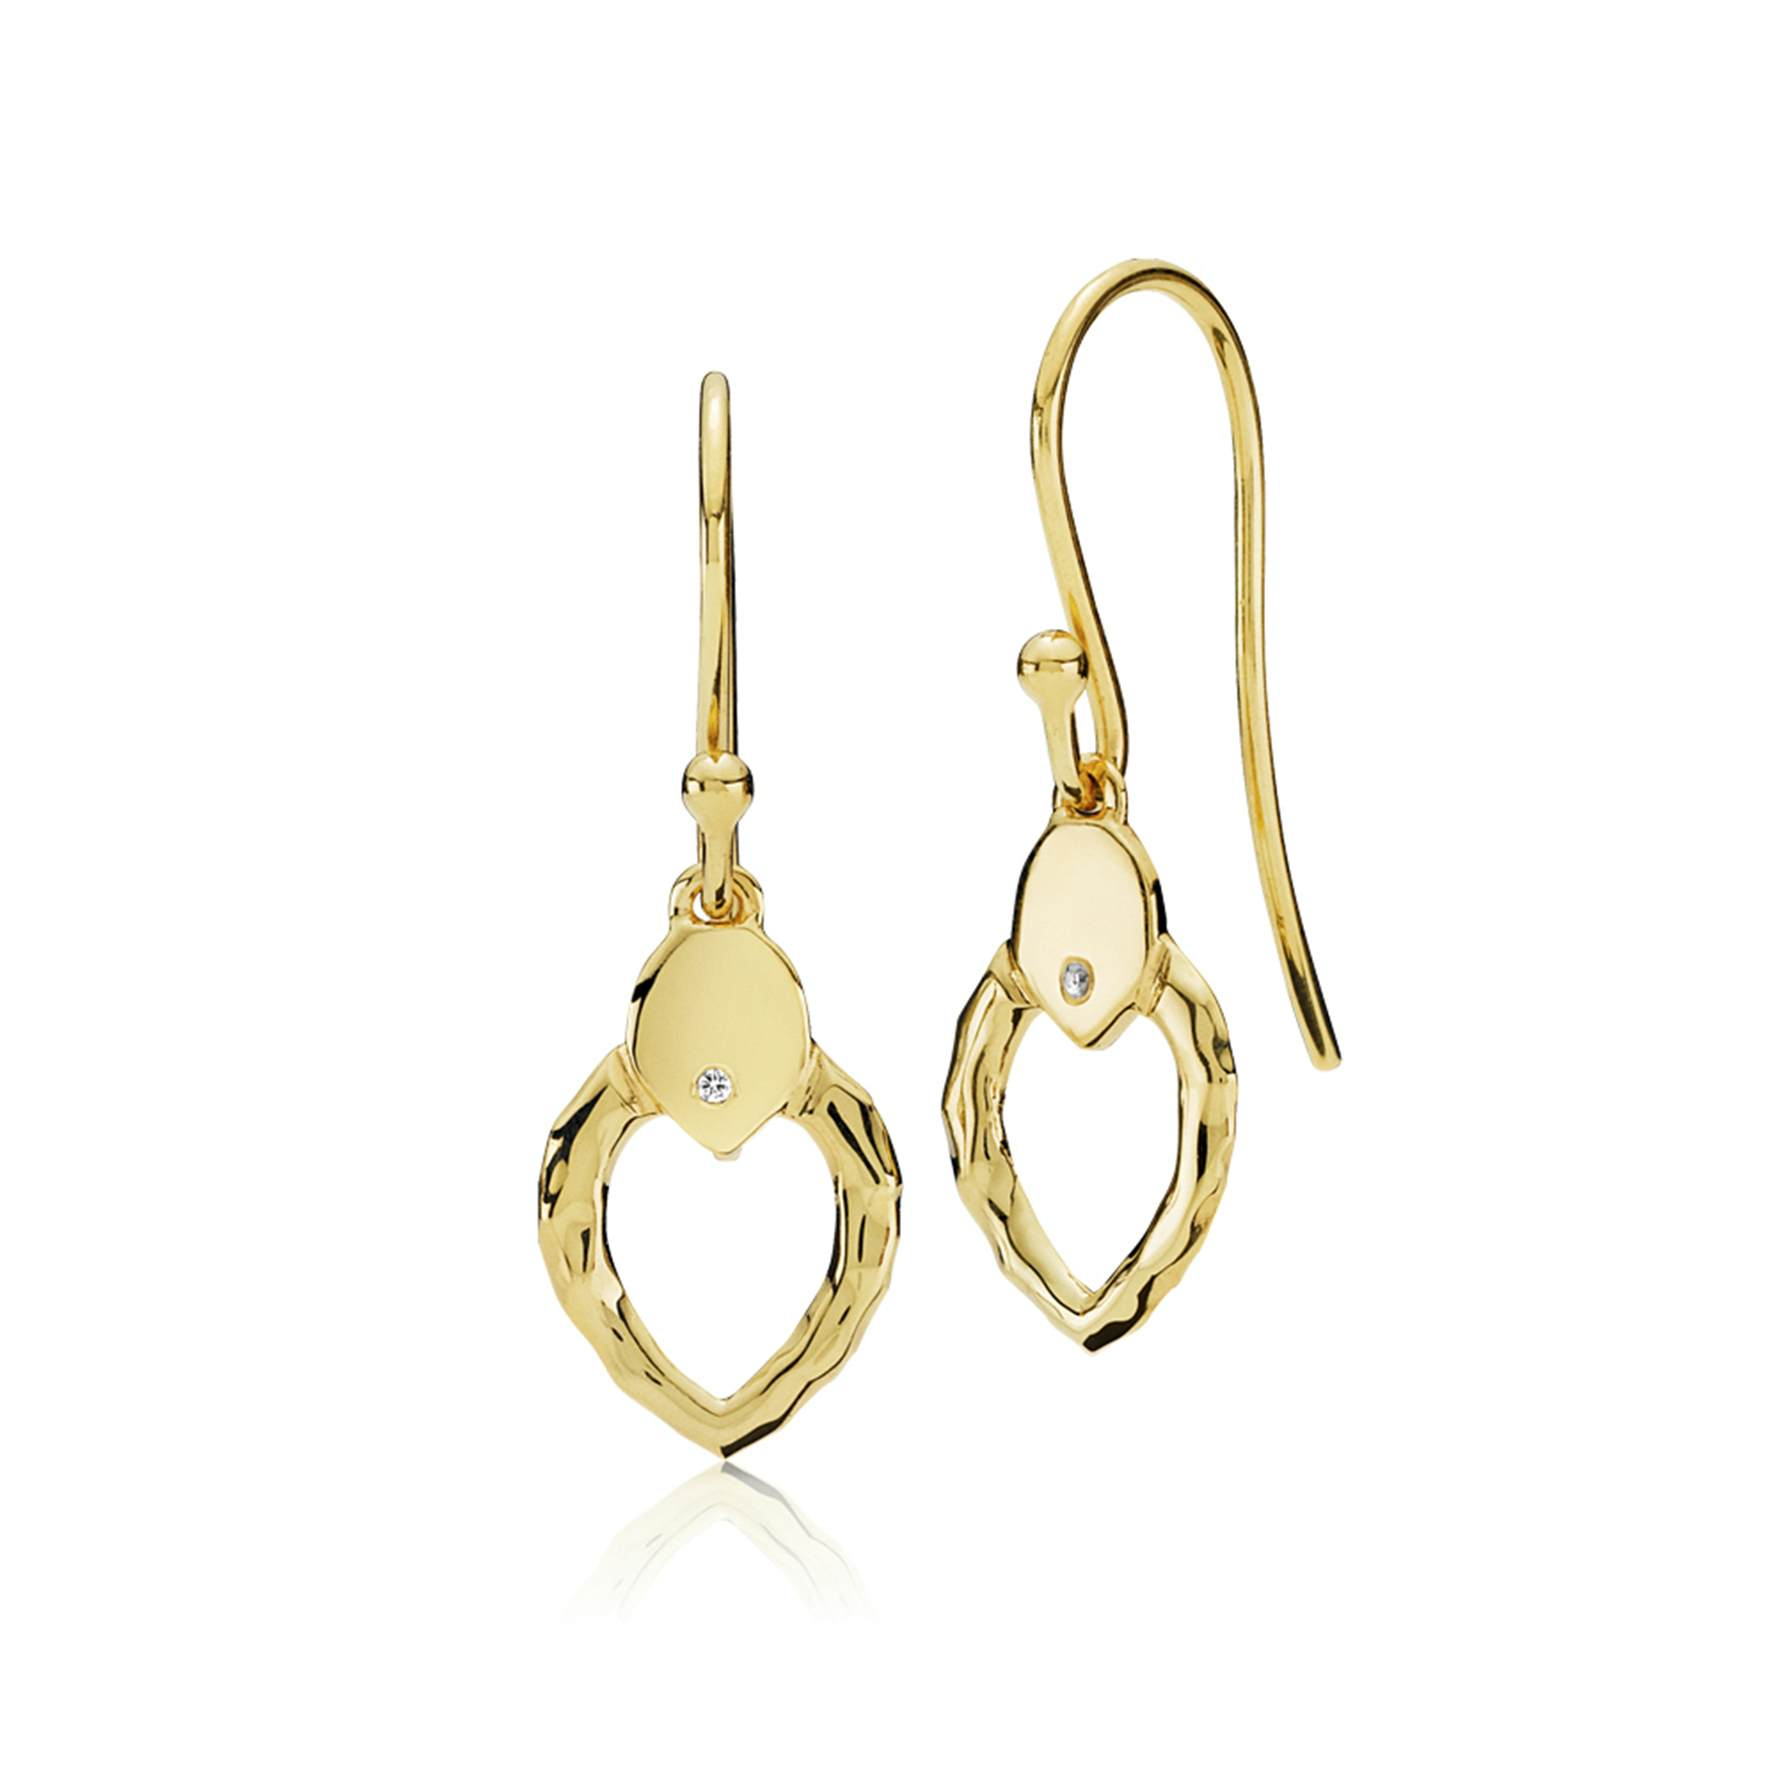 Cecilie Schmeichel Small Earrings